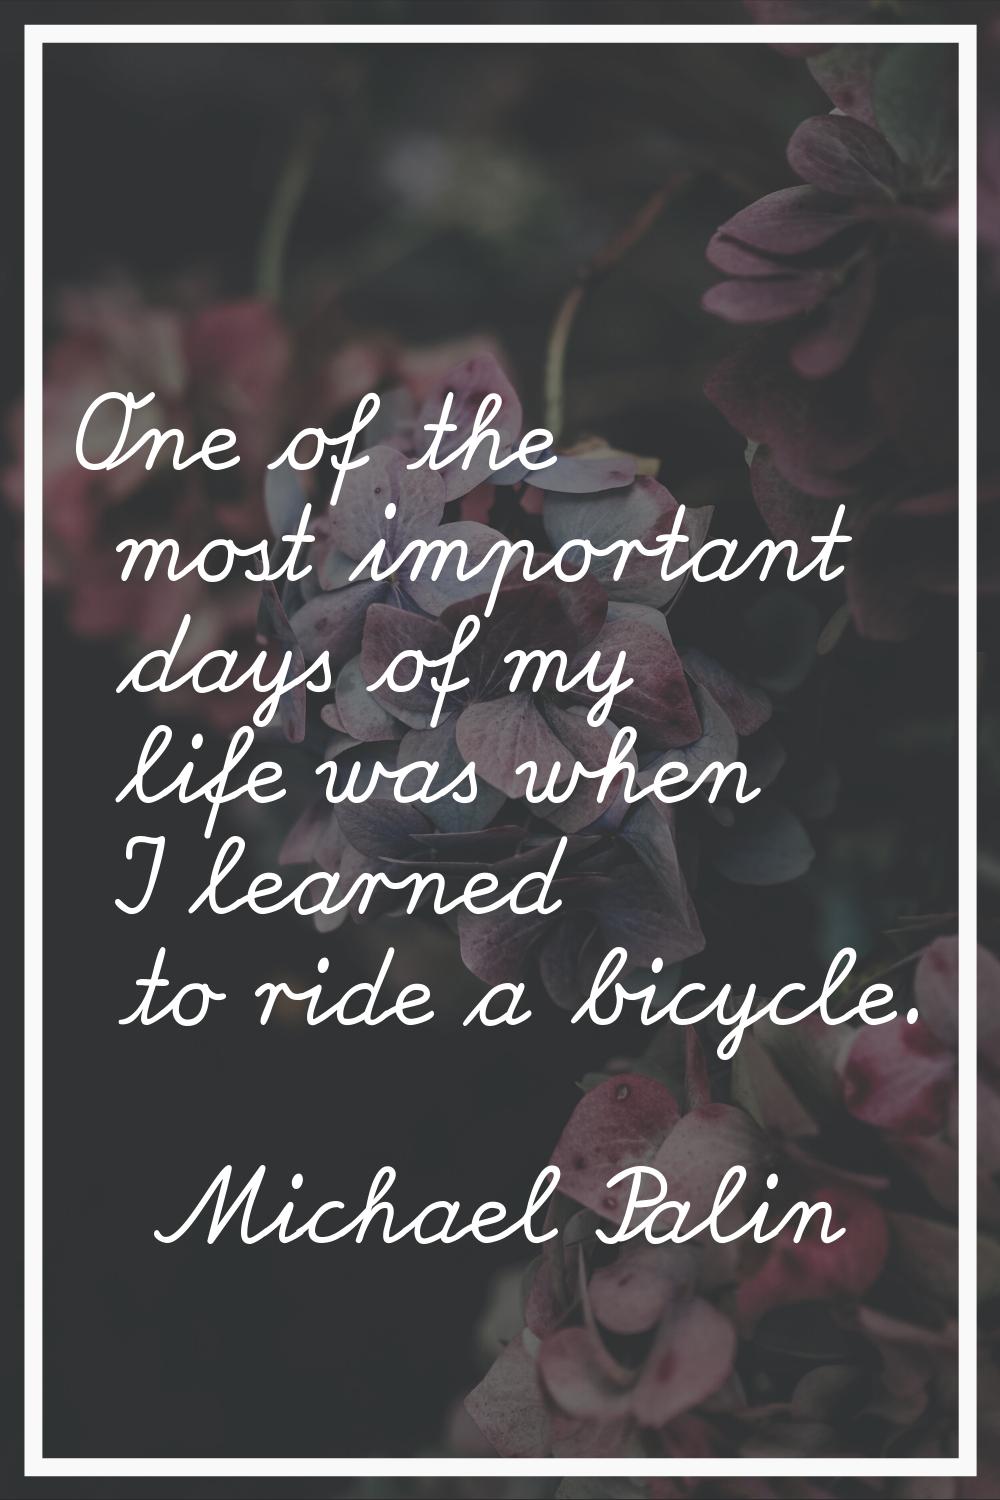 One of the most important days of my life was when I learned to ride a bicycle.